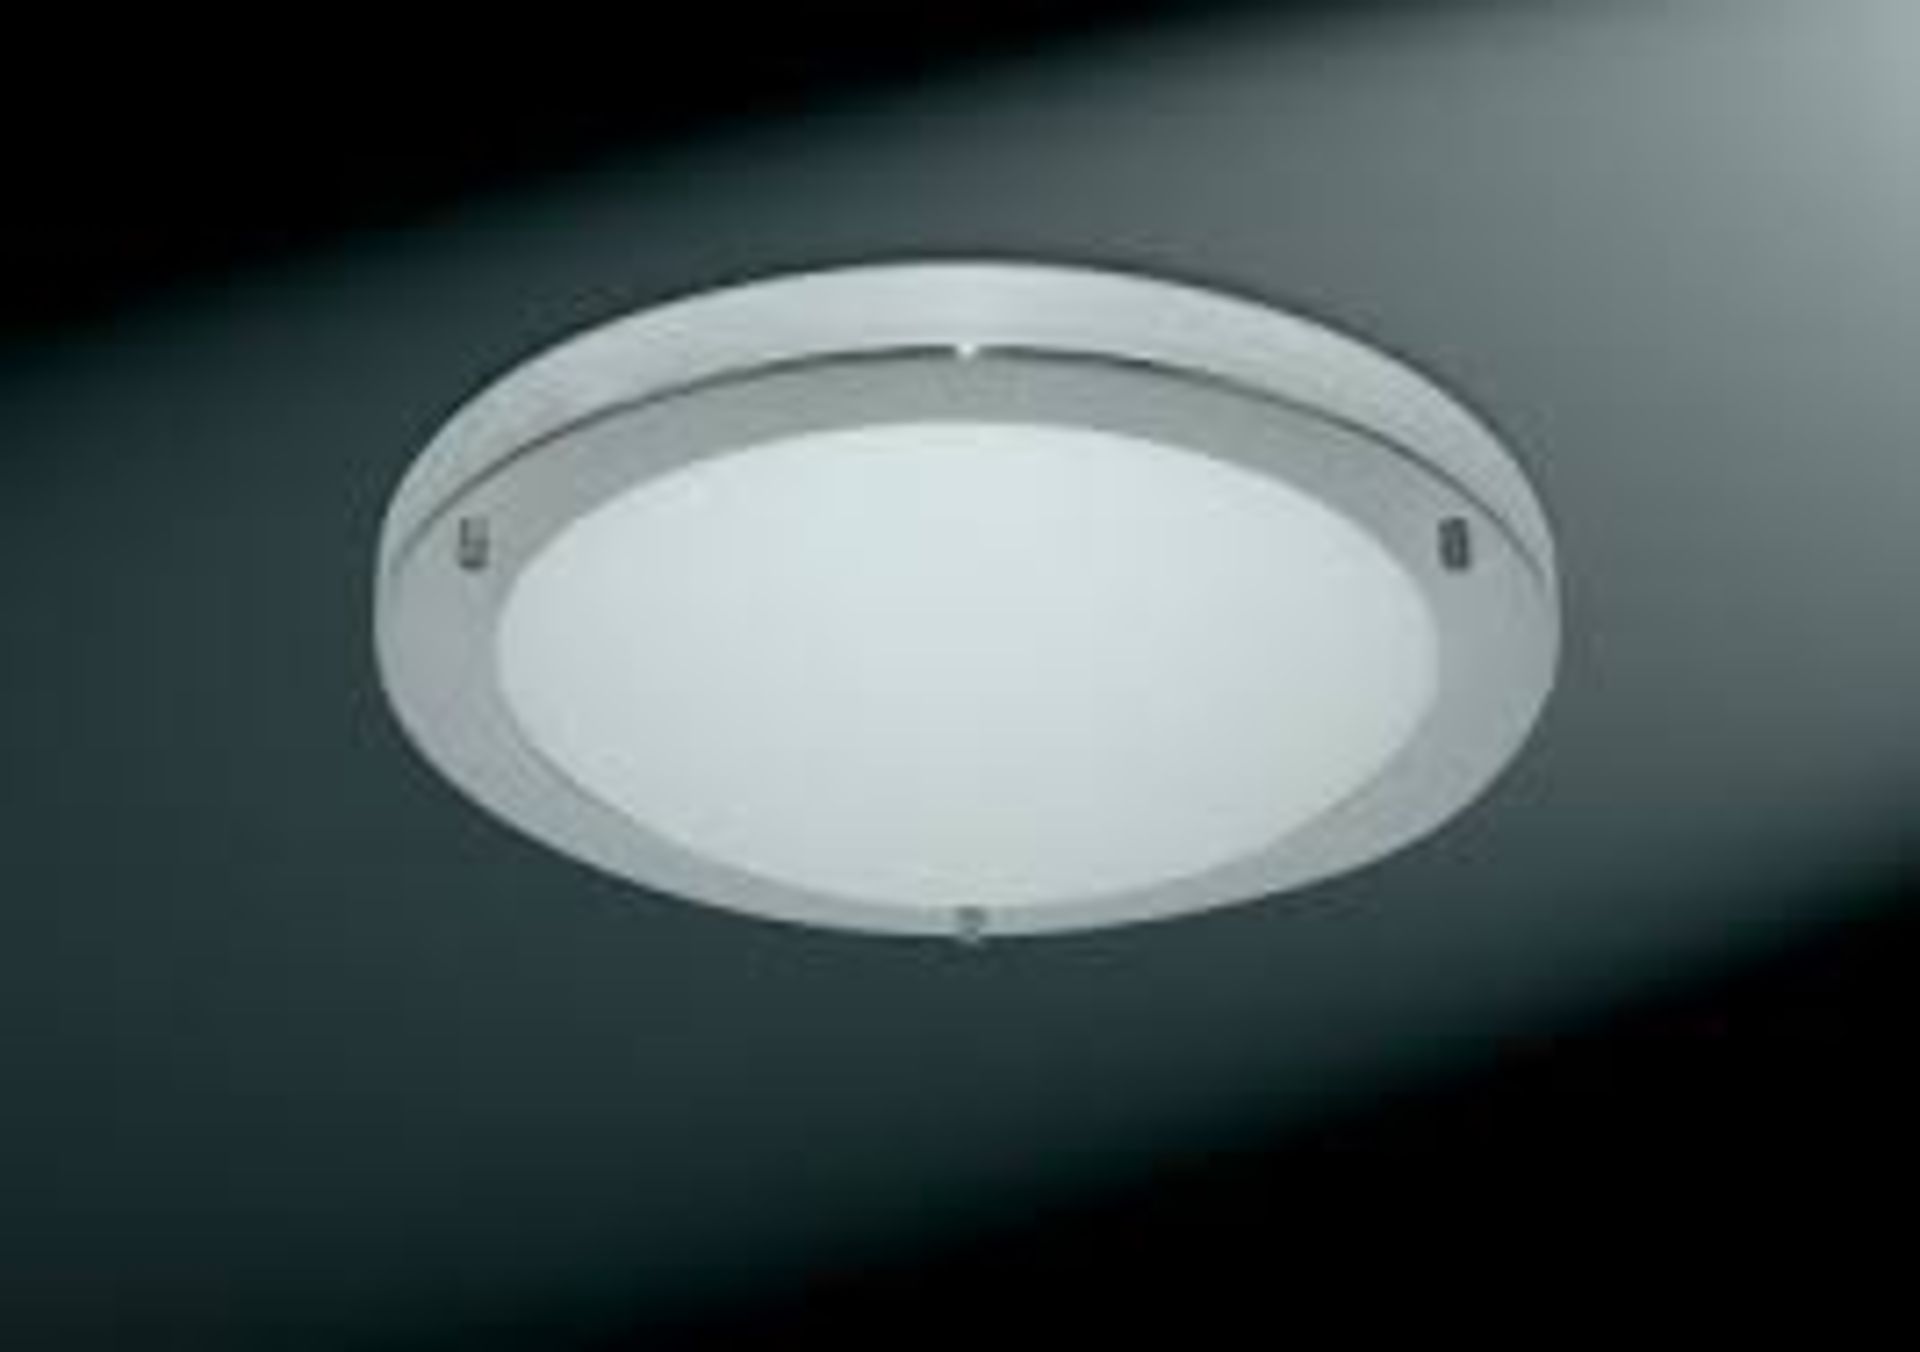 1 x Searchlight Bathroom Flush in a satin silver finish - Ref: 10632SS - New and Boxed - RRP: £60.00 - Image 2 of 4